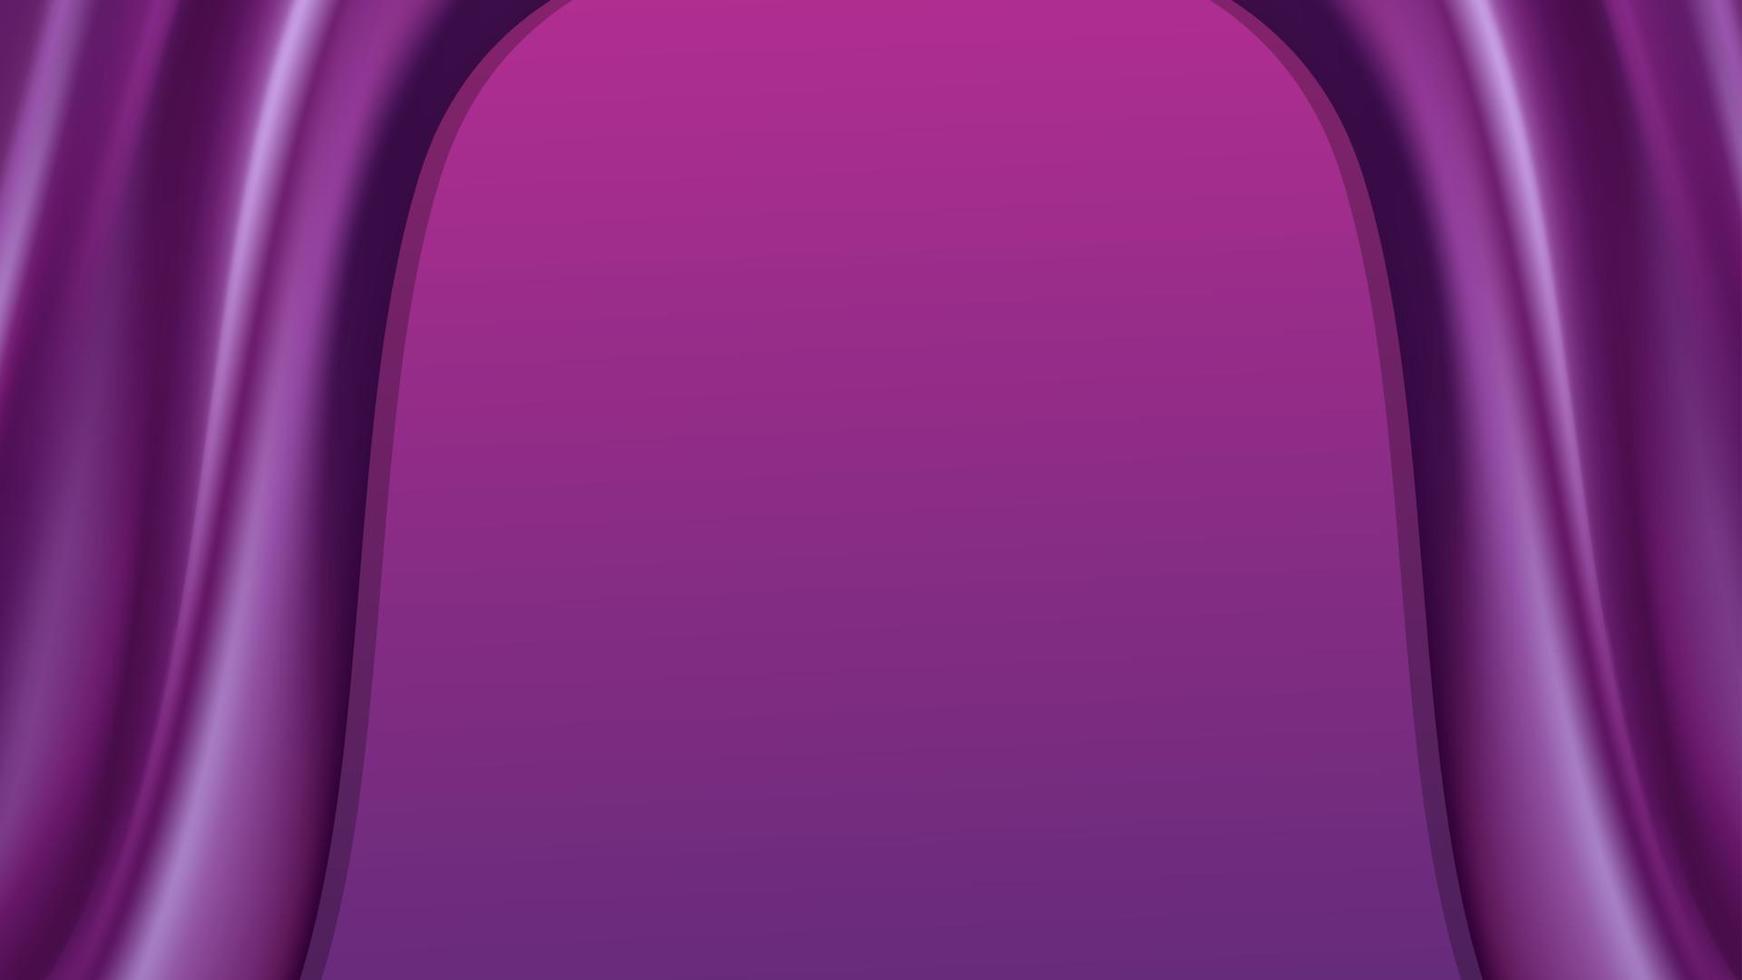 Vector Purple Wave Abstract Background